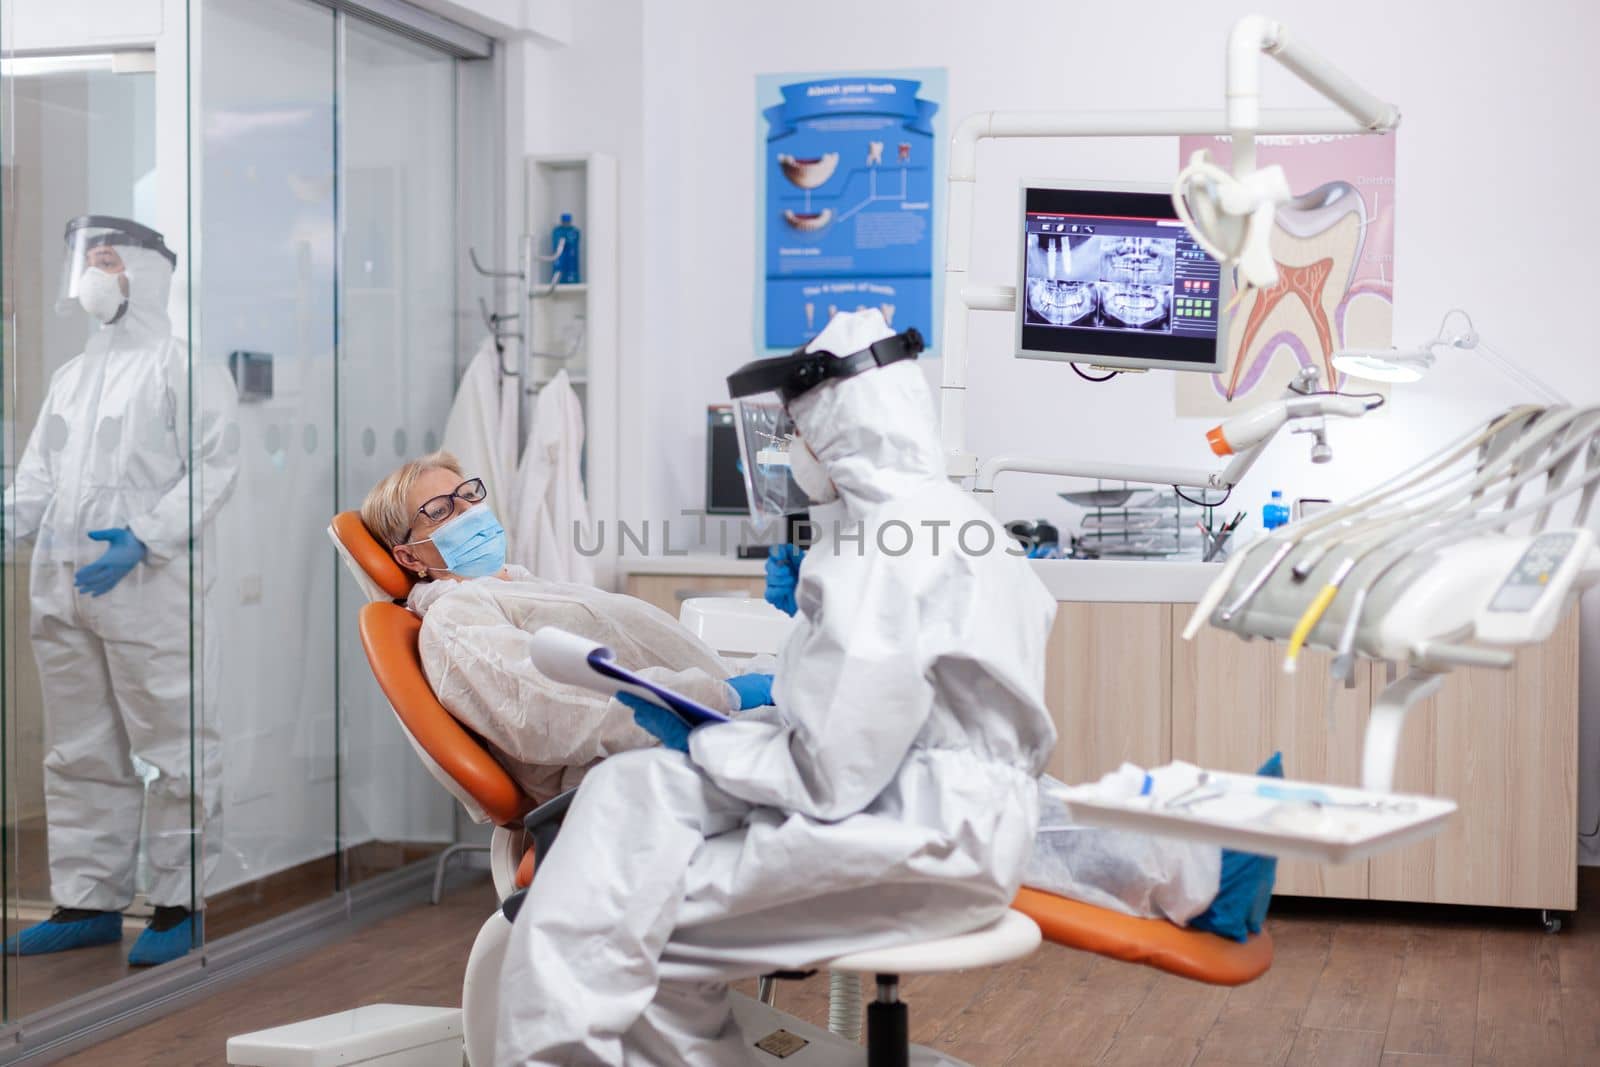 Dentist assitatnt questioning patient wearing protective equipment against coronavirus. Elderly woman in protective uniform during medical examination in dental clinic.